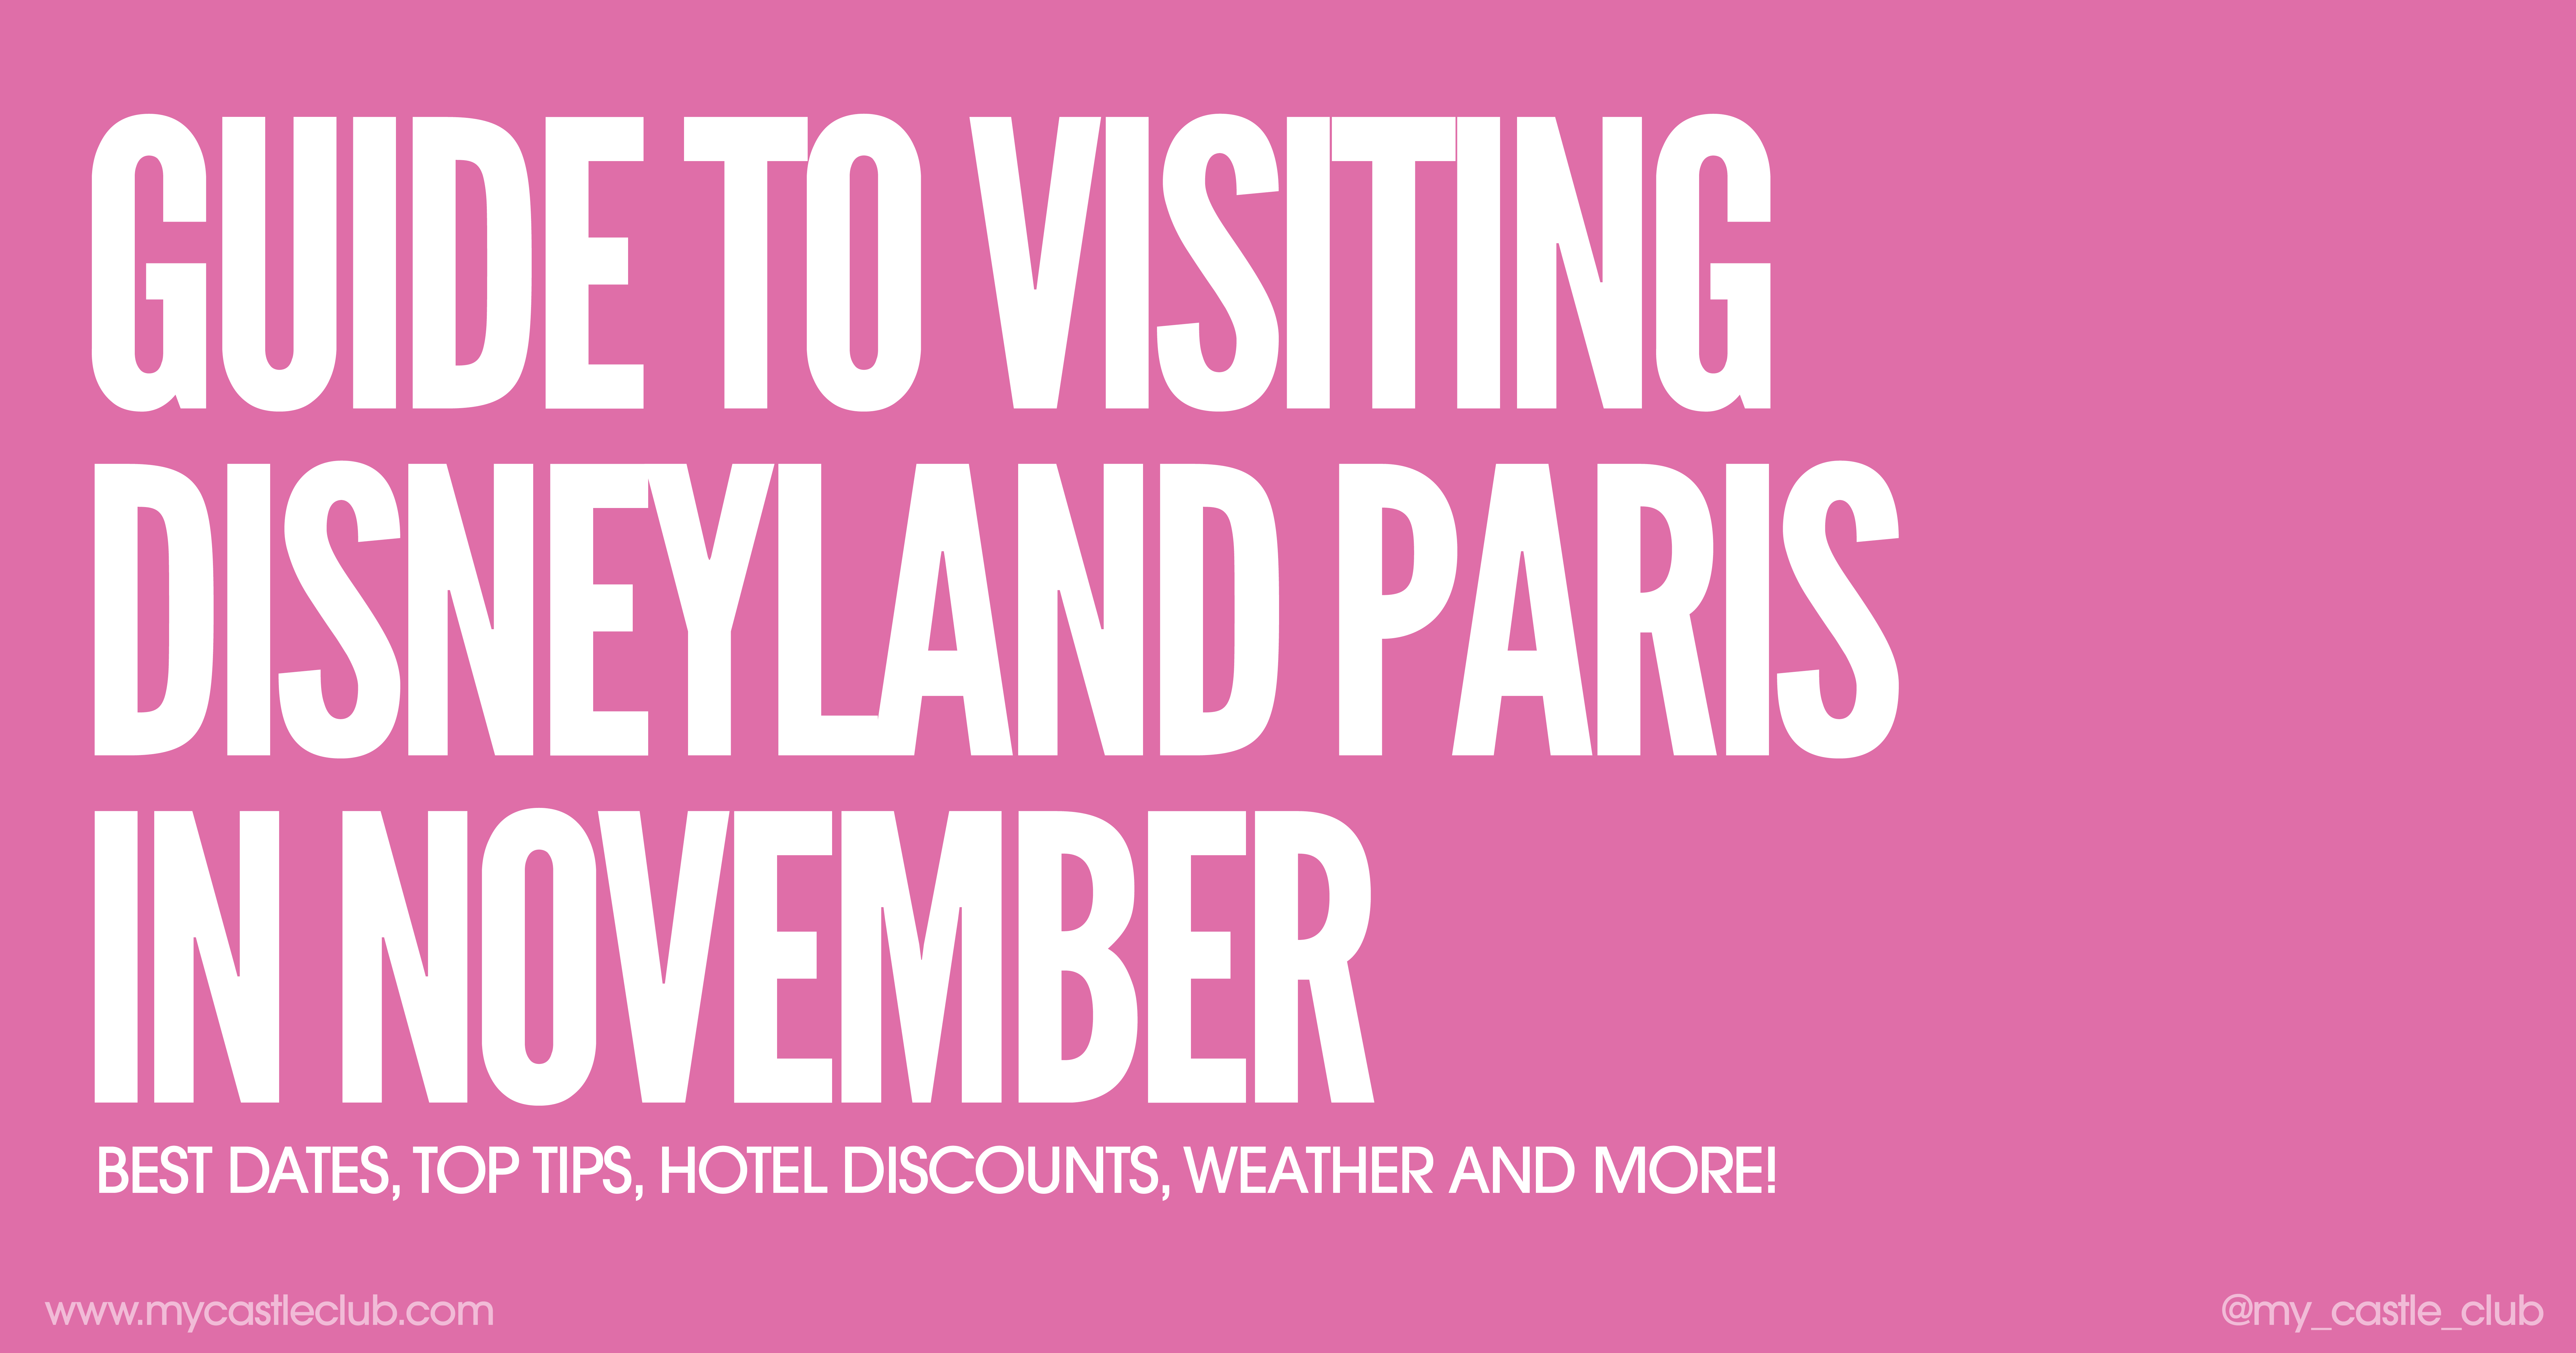 Visiting Disneyland Paris in November, Best Dates, Top Tips, Hotel Discounts, Weather and more!